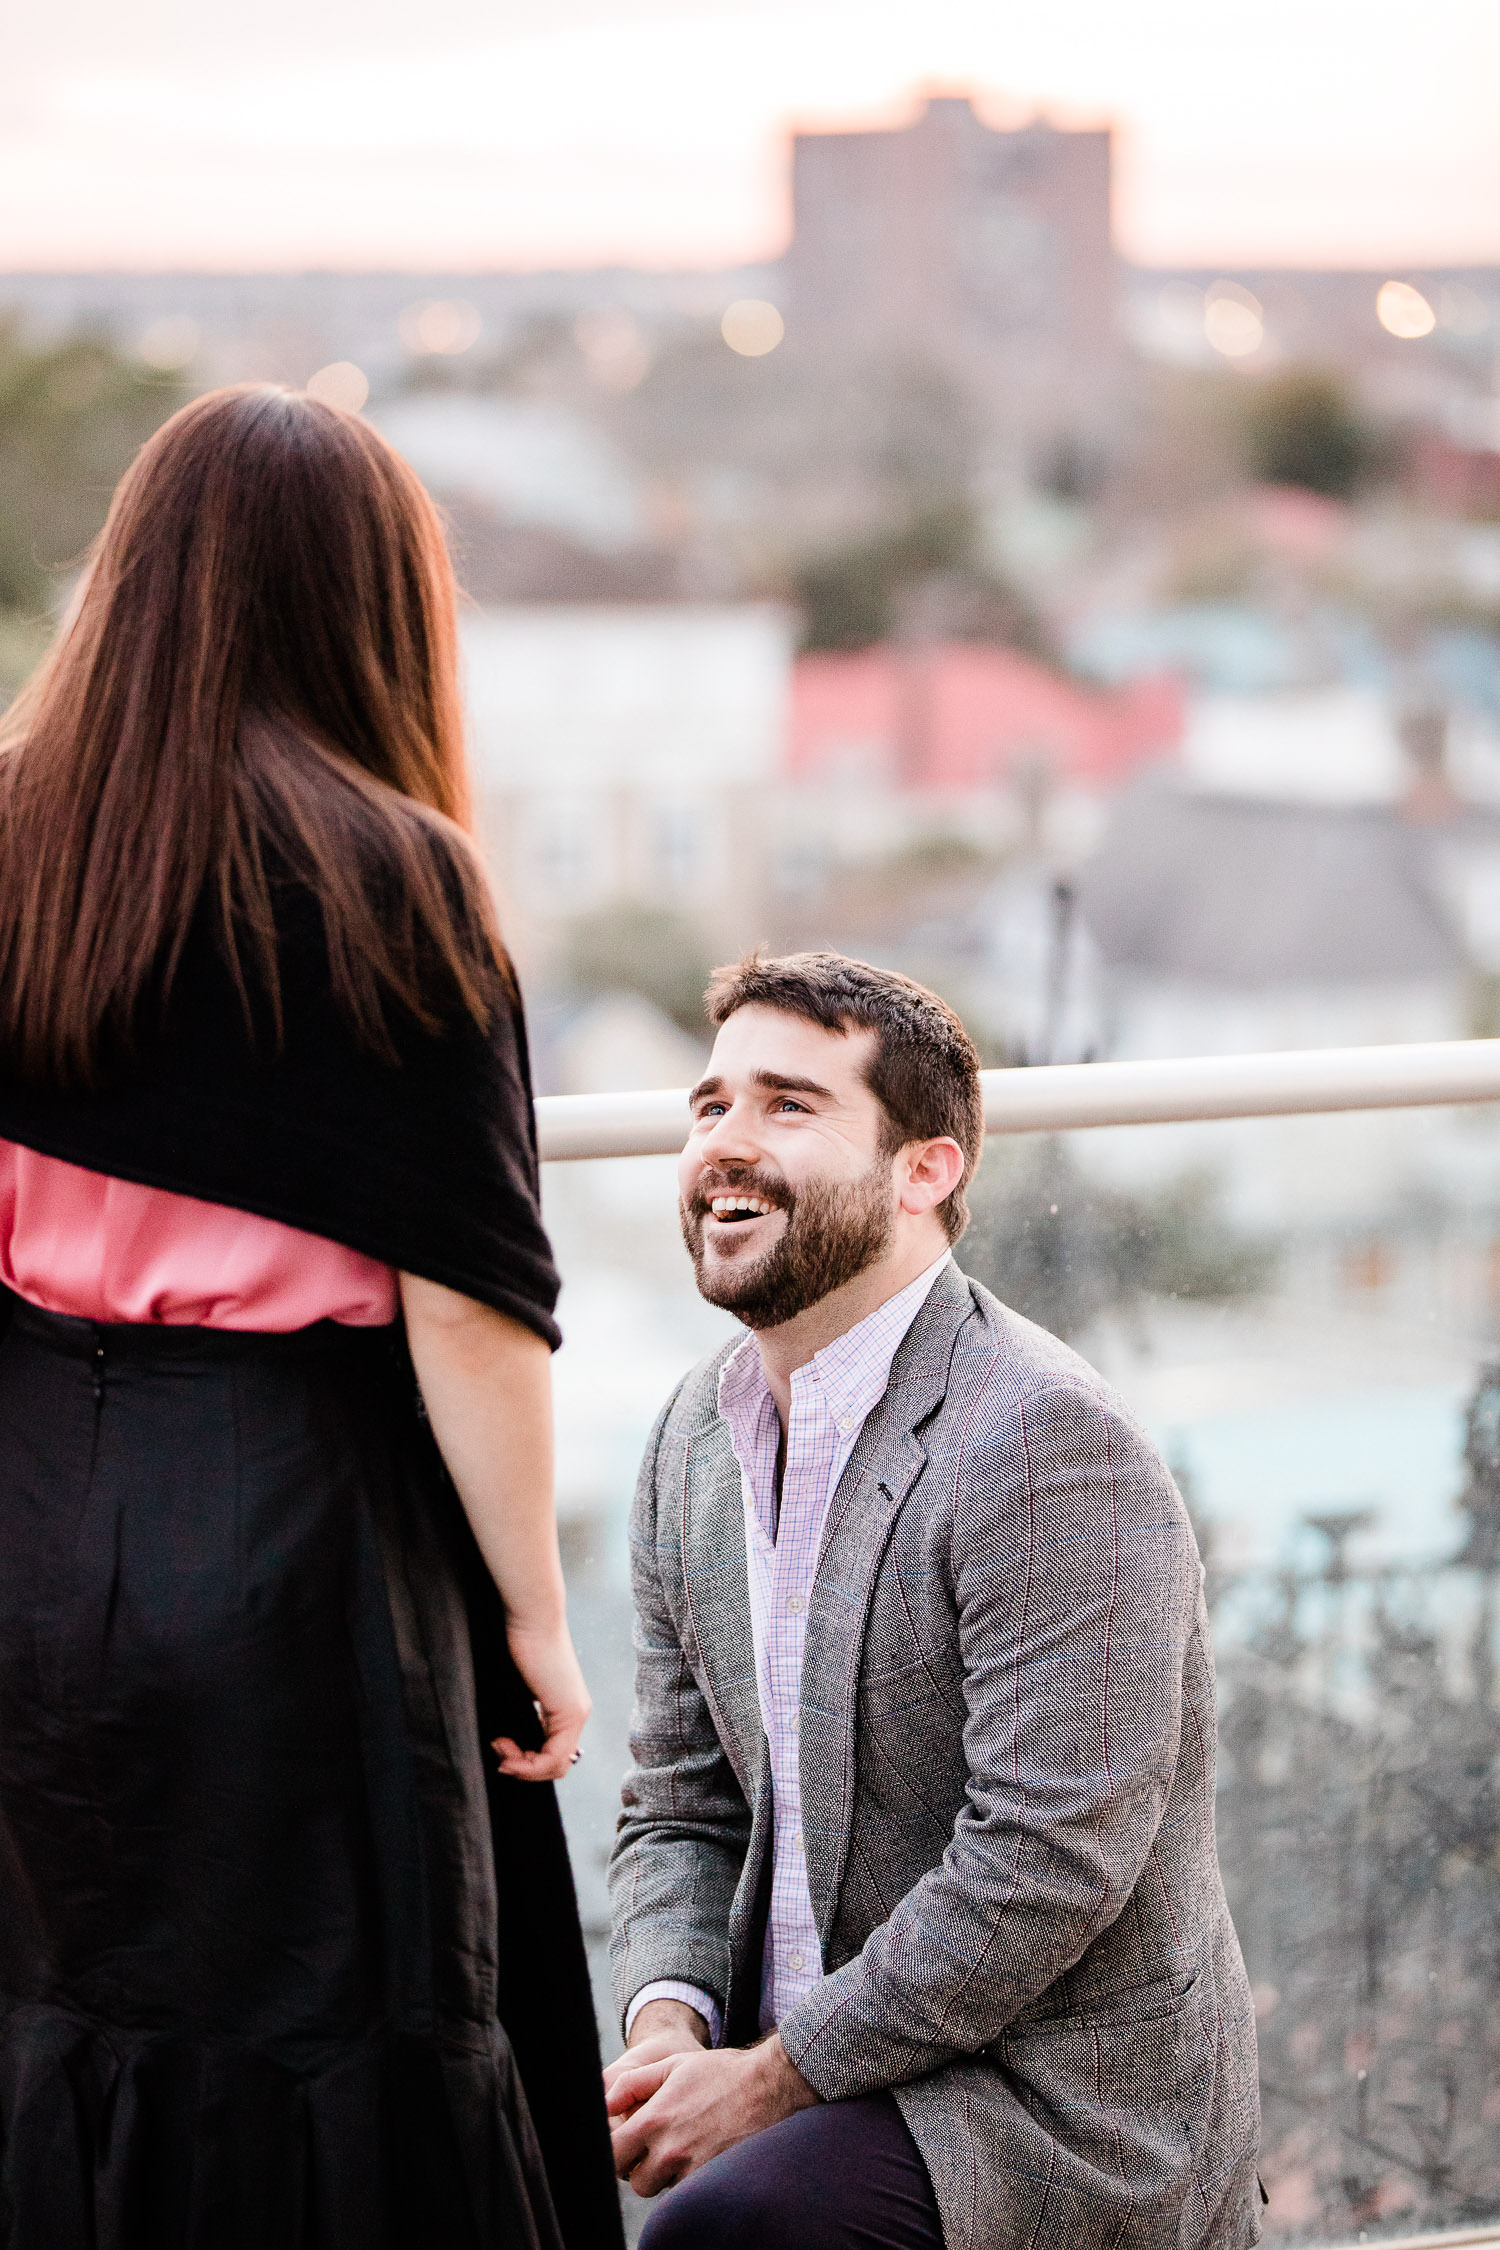 Kerrison + Stephen // Romantic Proposal at the Wentworth Mansion